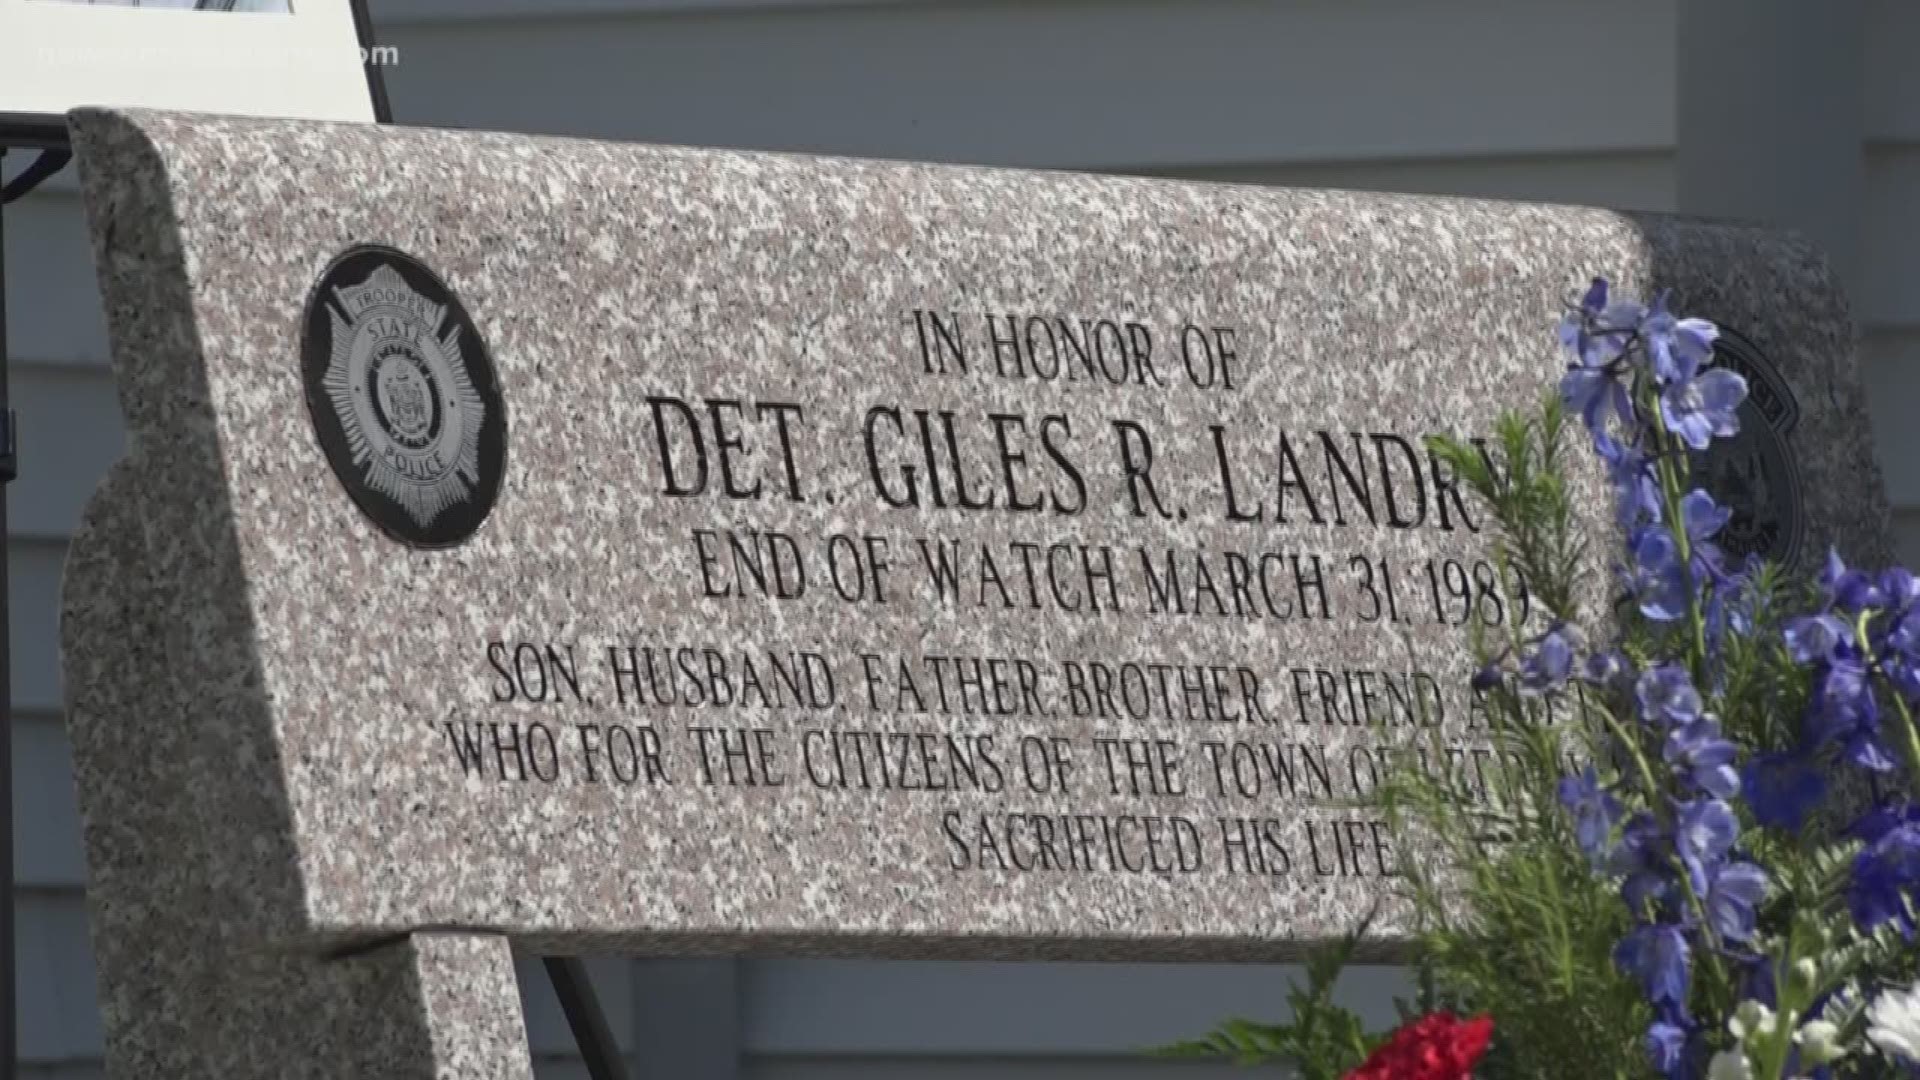 The law enforcement community came together to honor Det. Giles Landry, who was shot and killed in the line of duty more than 30 years ago.